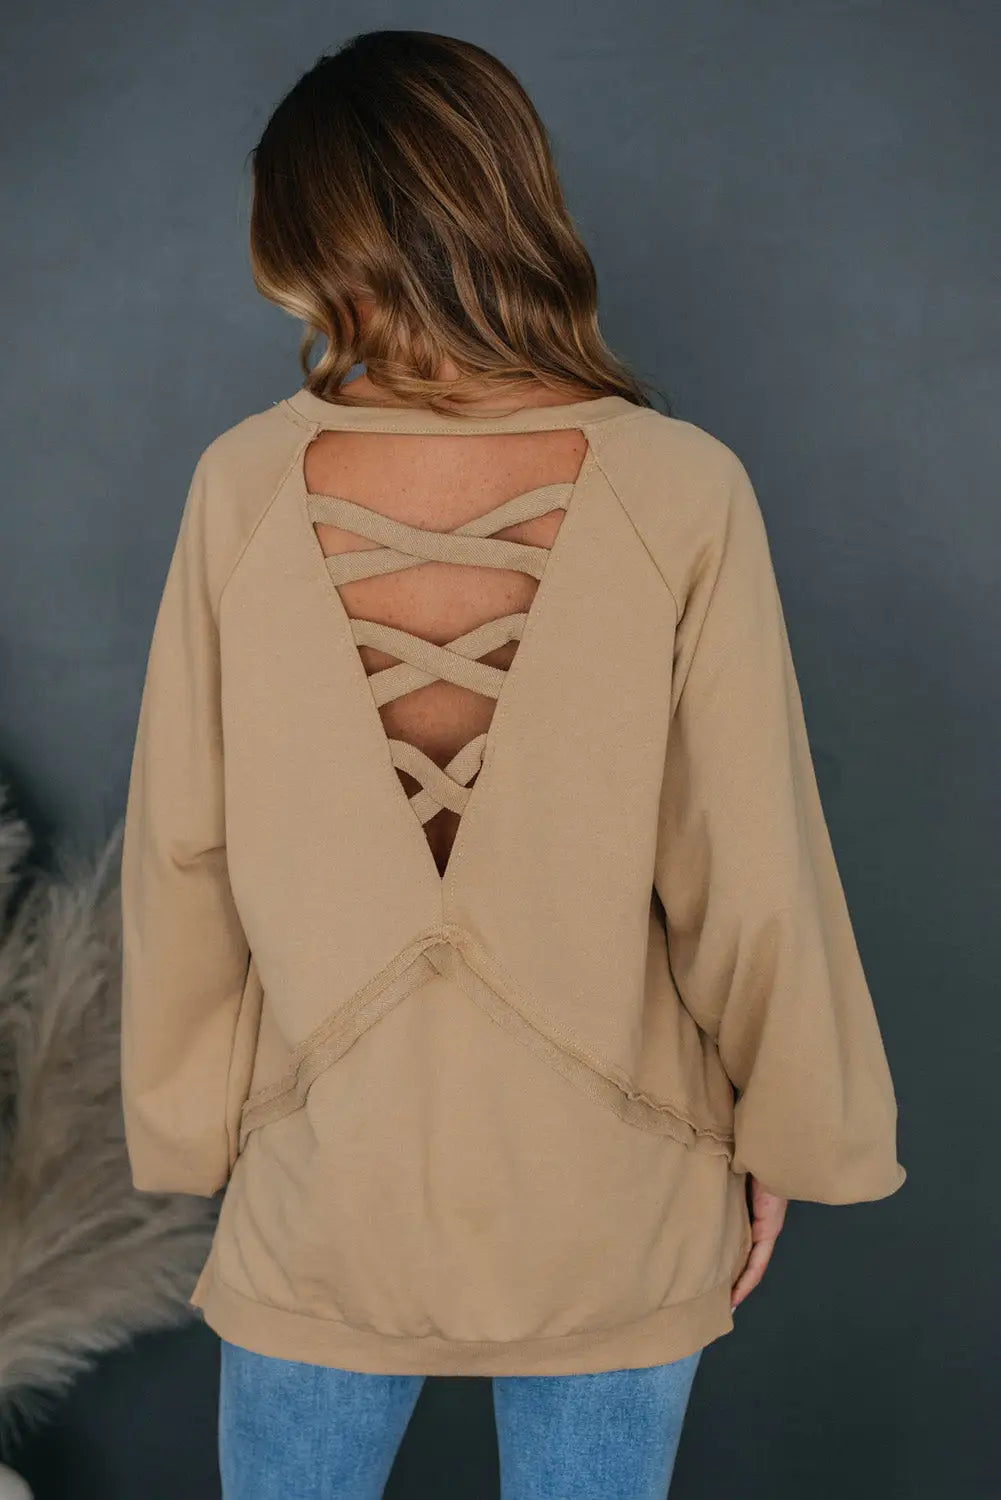 Light french beige solid color lattice hollow out back sweatshirt - sweatshirts & hoodies